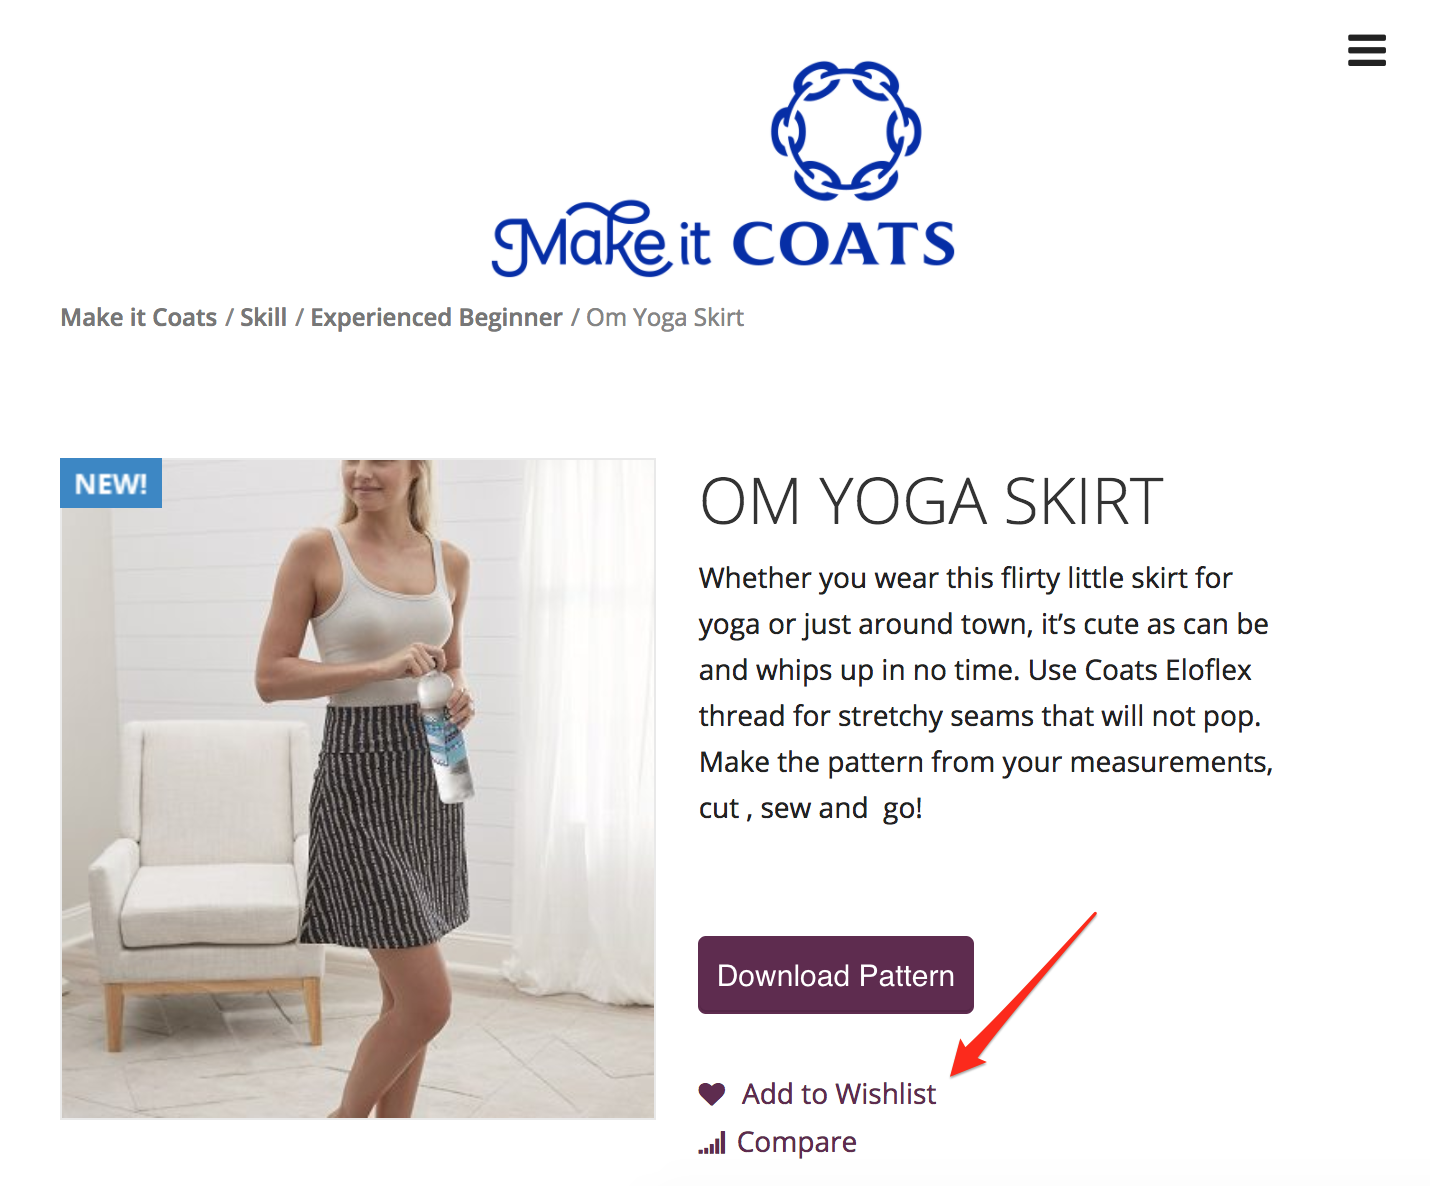 Screenshot showing a product page for a skirt